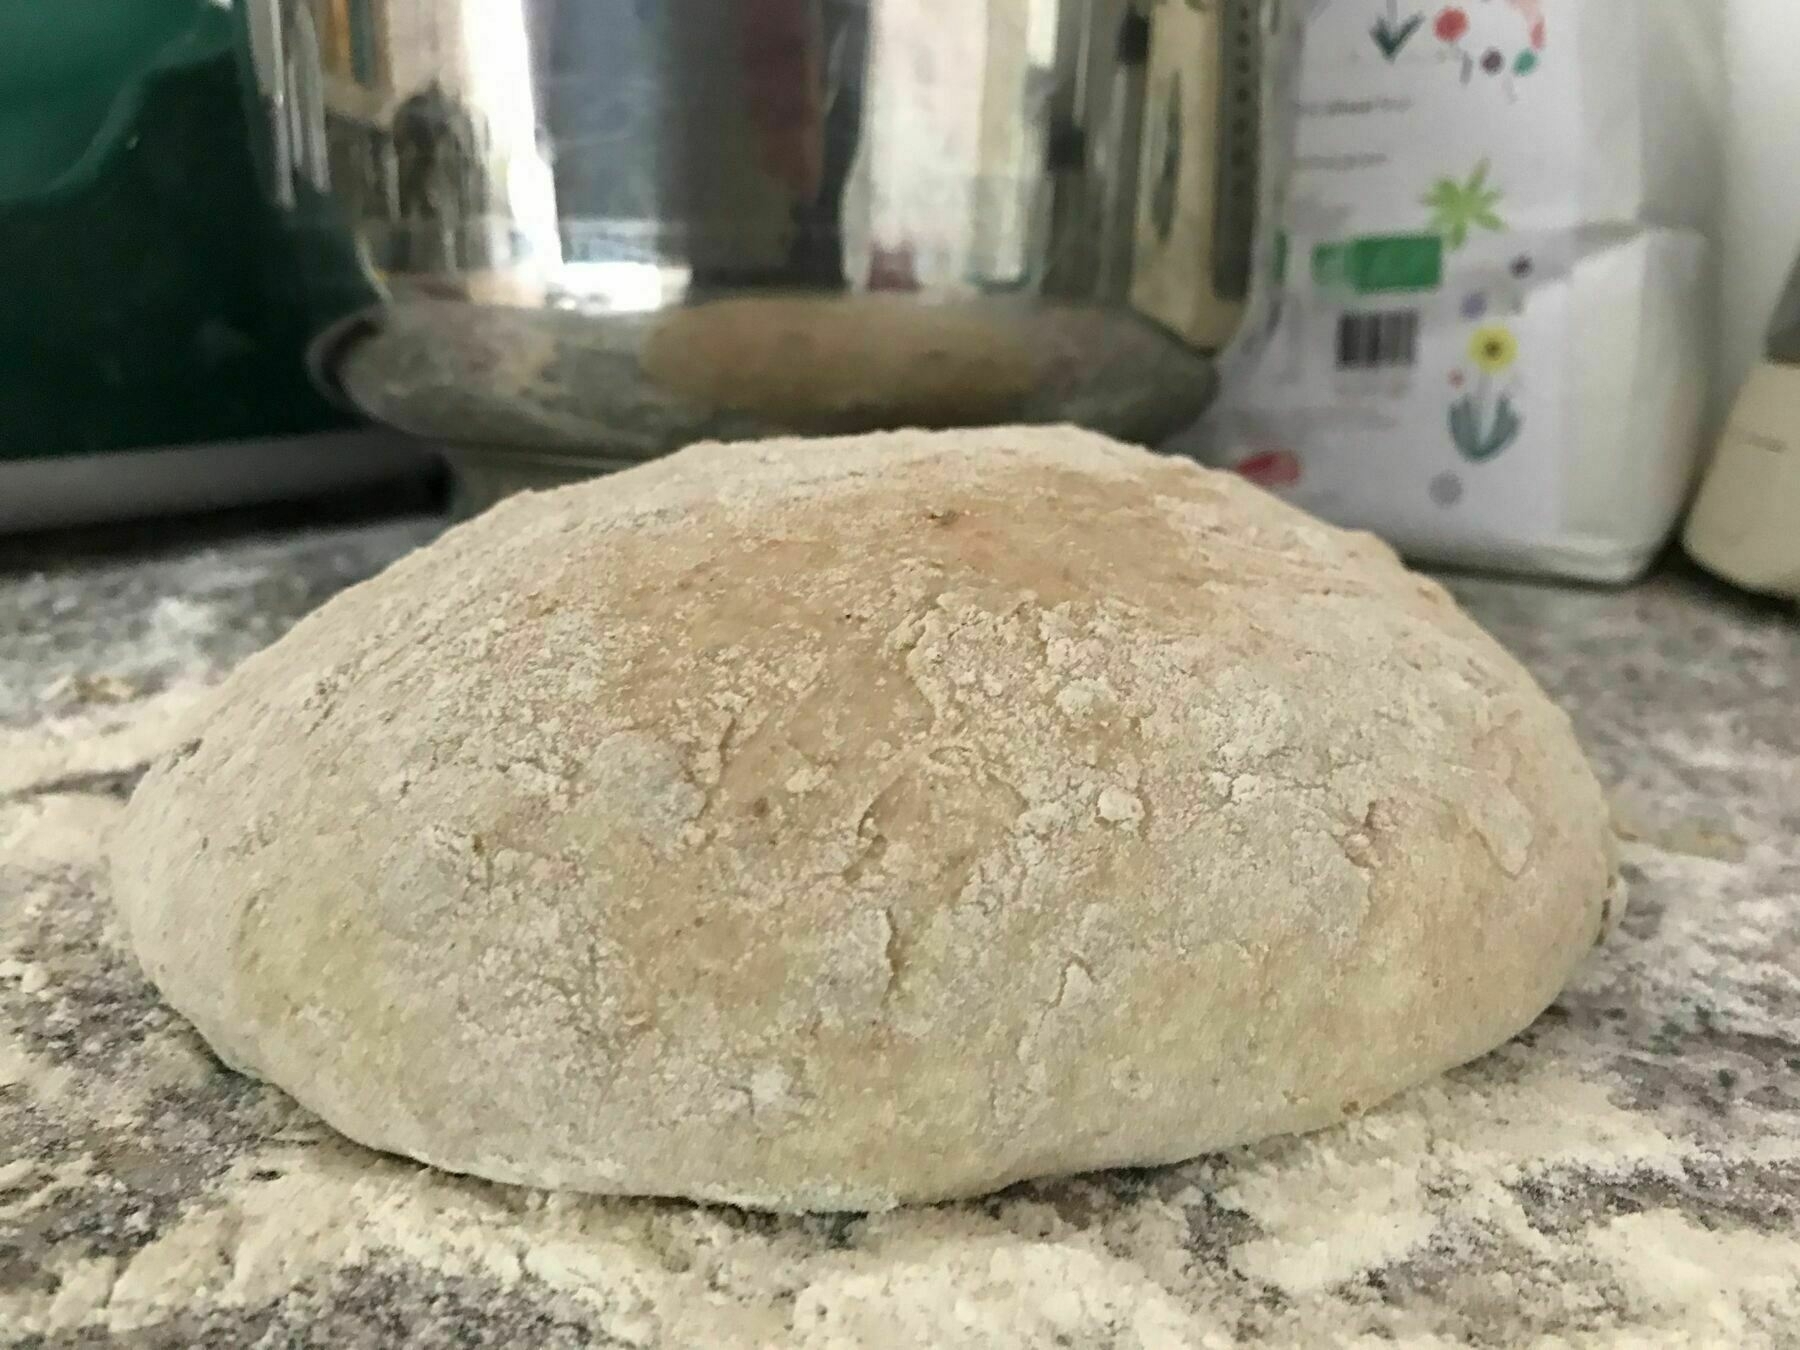 Bread dough resting before being shaped into a loaf